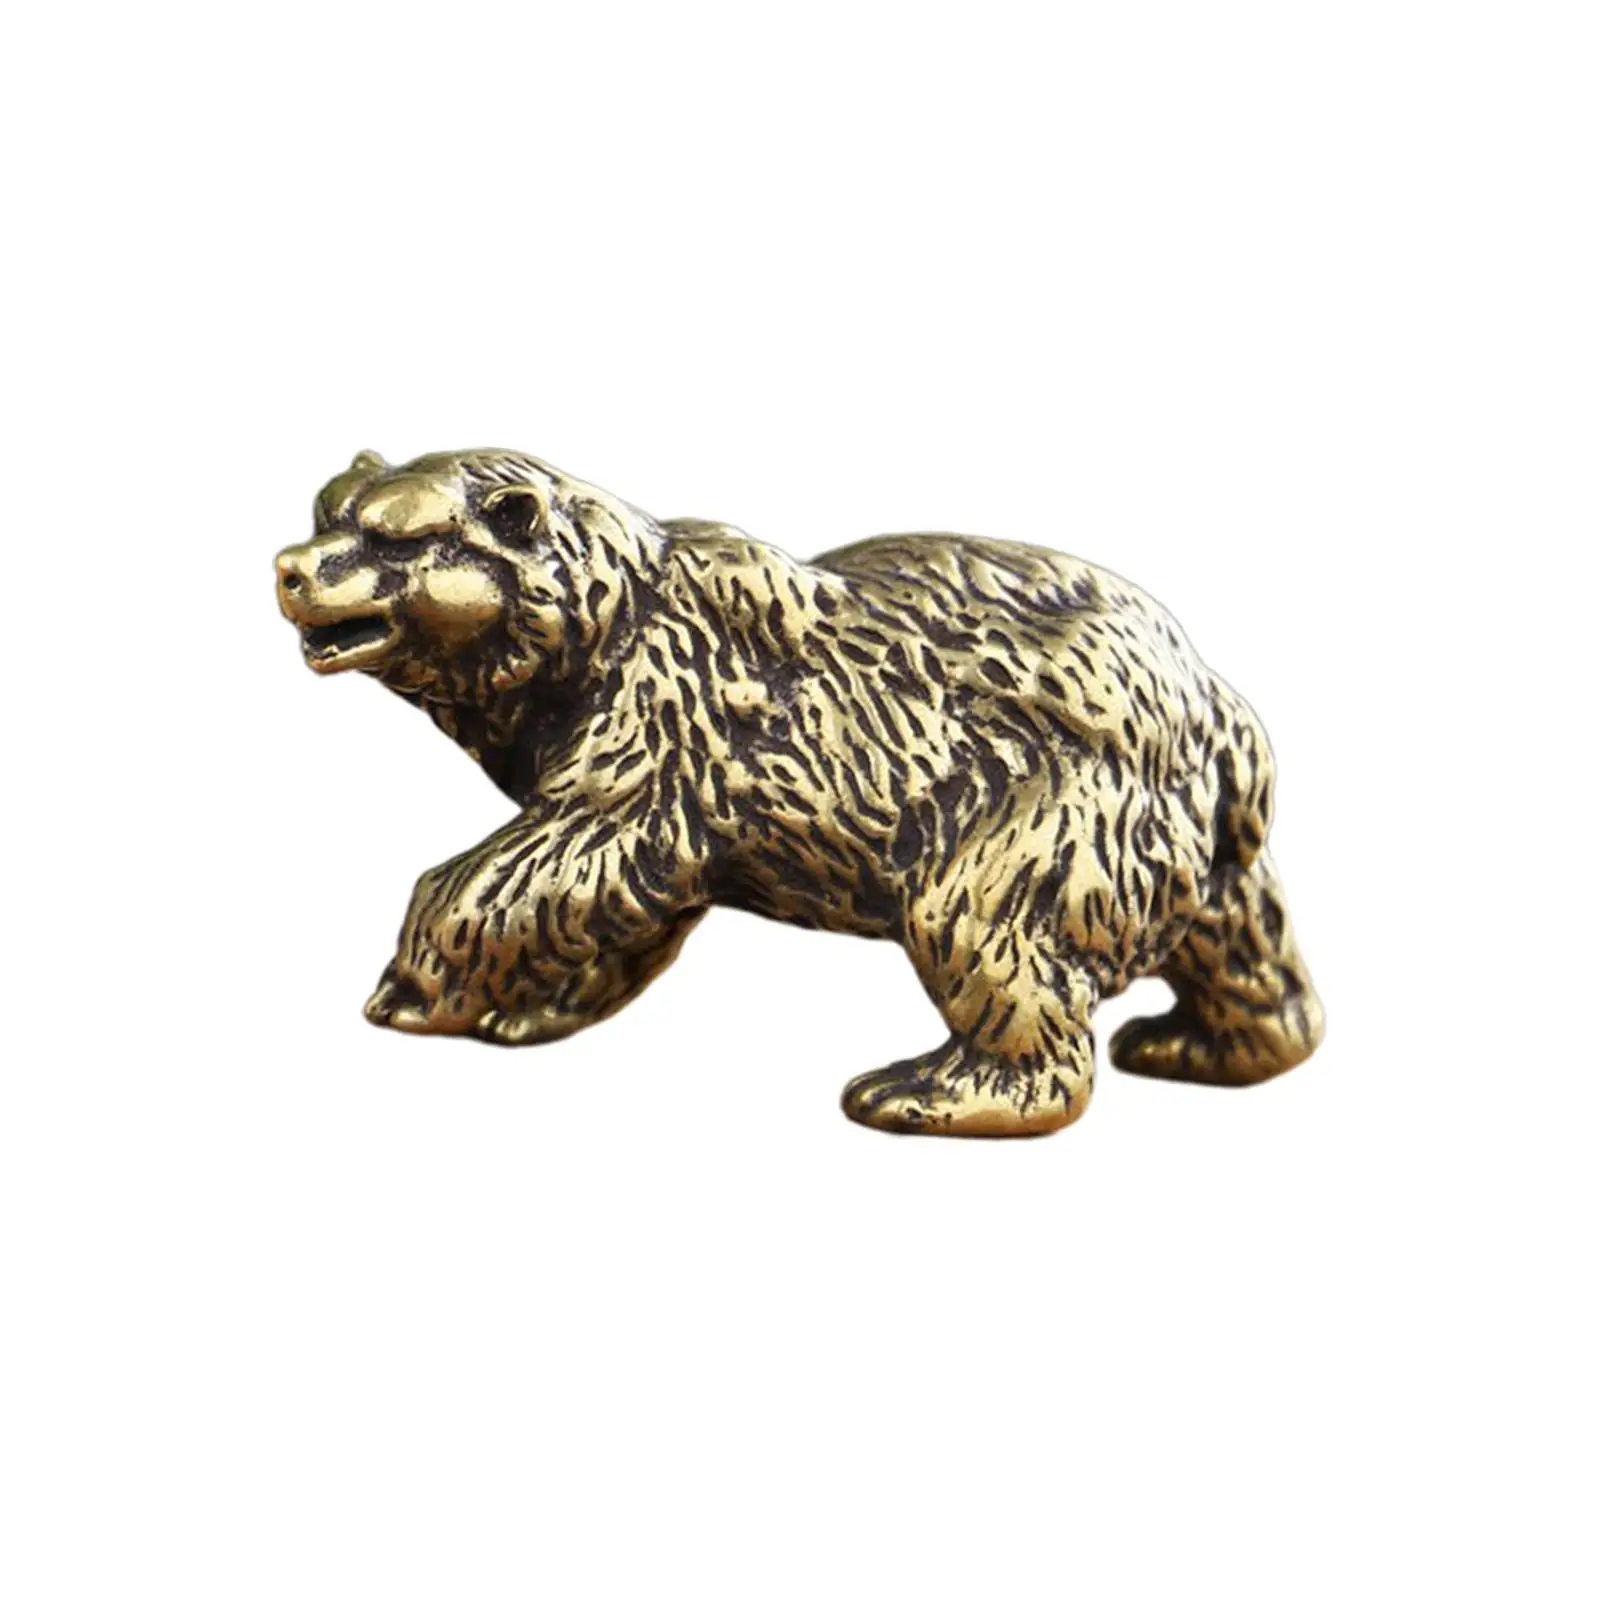 Bear Ornament Handmade Small Gifts Art Crafts Retro Powerful Animal Statue for Cafe Tabletop Living Room Bookcase Shelf Outdoor